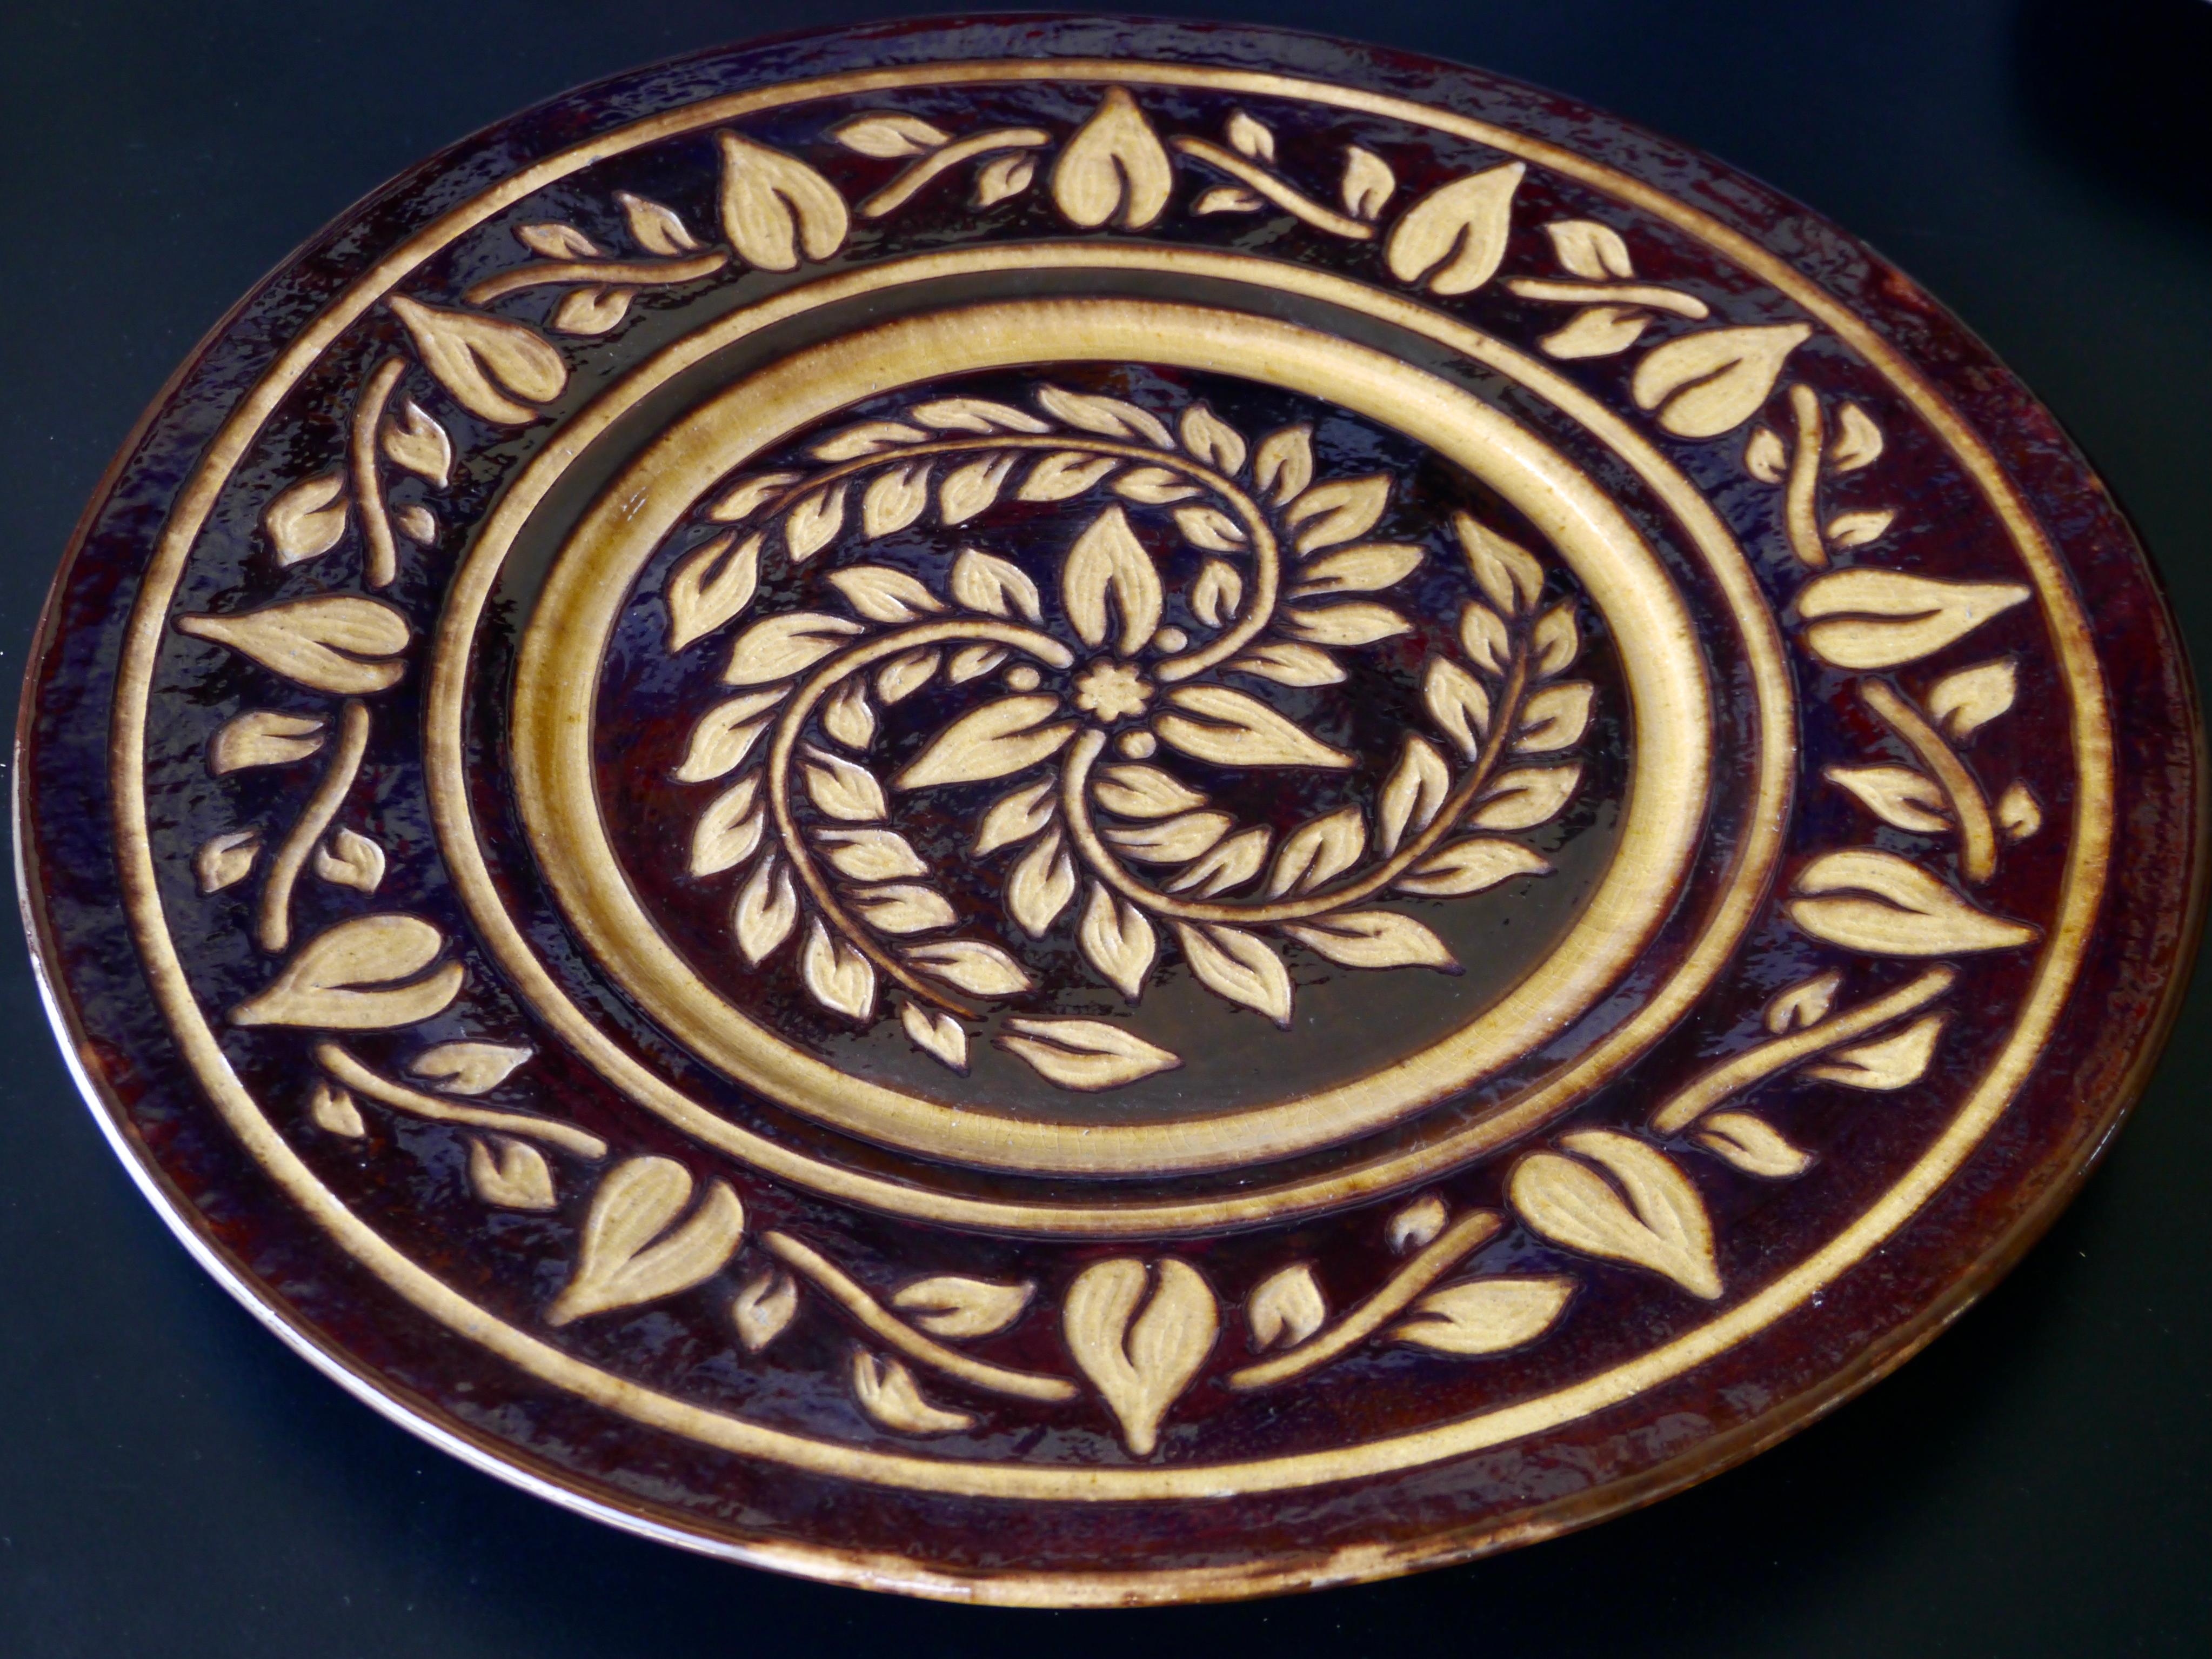 Exceptional dimensions for this extra-large dish which can be also a wall-mounted decoration.
Glazed earthenware with incised floral decor.

Hollow stamp on the back.

Ceramic center since Antiquity, the charming city of Biot has gained notoriety